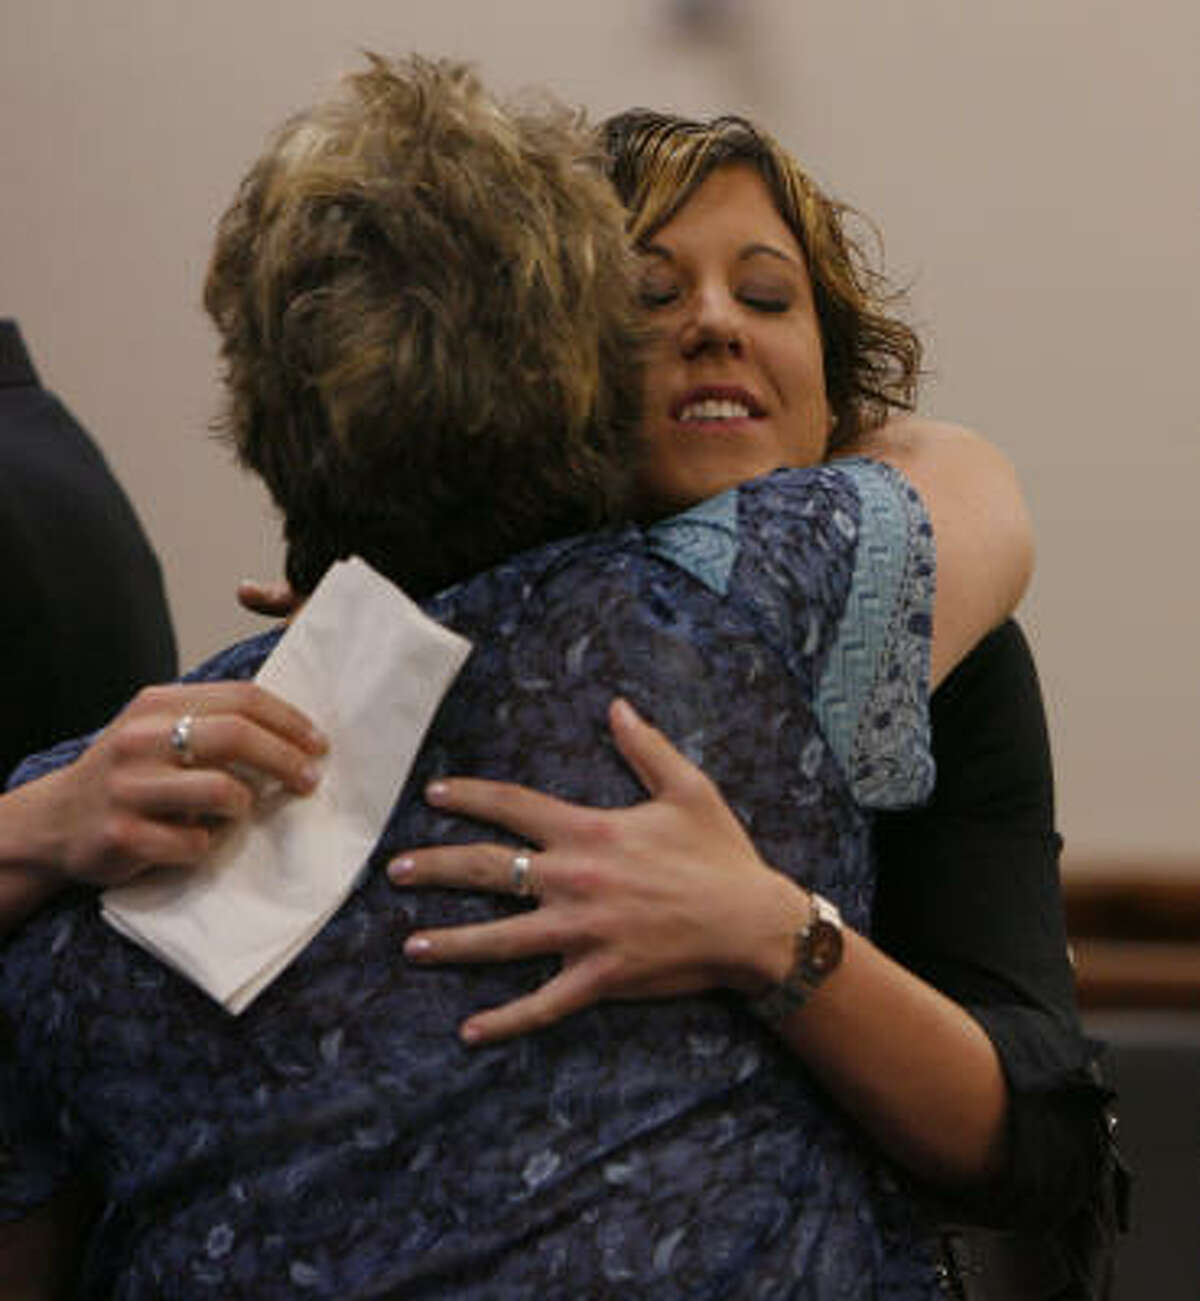 Eva Rowe, right, embraces Carol Ware, a secretary for her attorney, after reaching a settlement Thursday with BP in the deaths of her parents. Rowe, 22, has vowed to use some of the money to crusade for workplace safety nationwide.